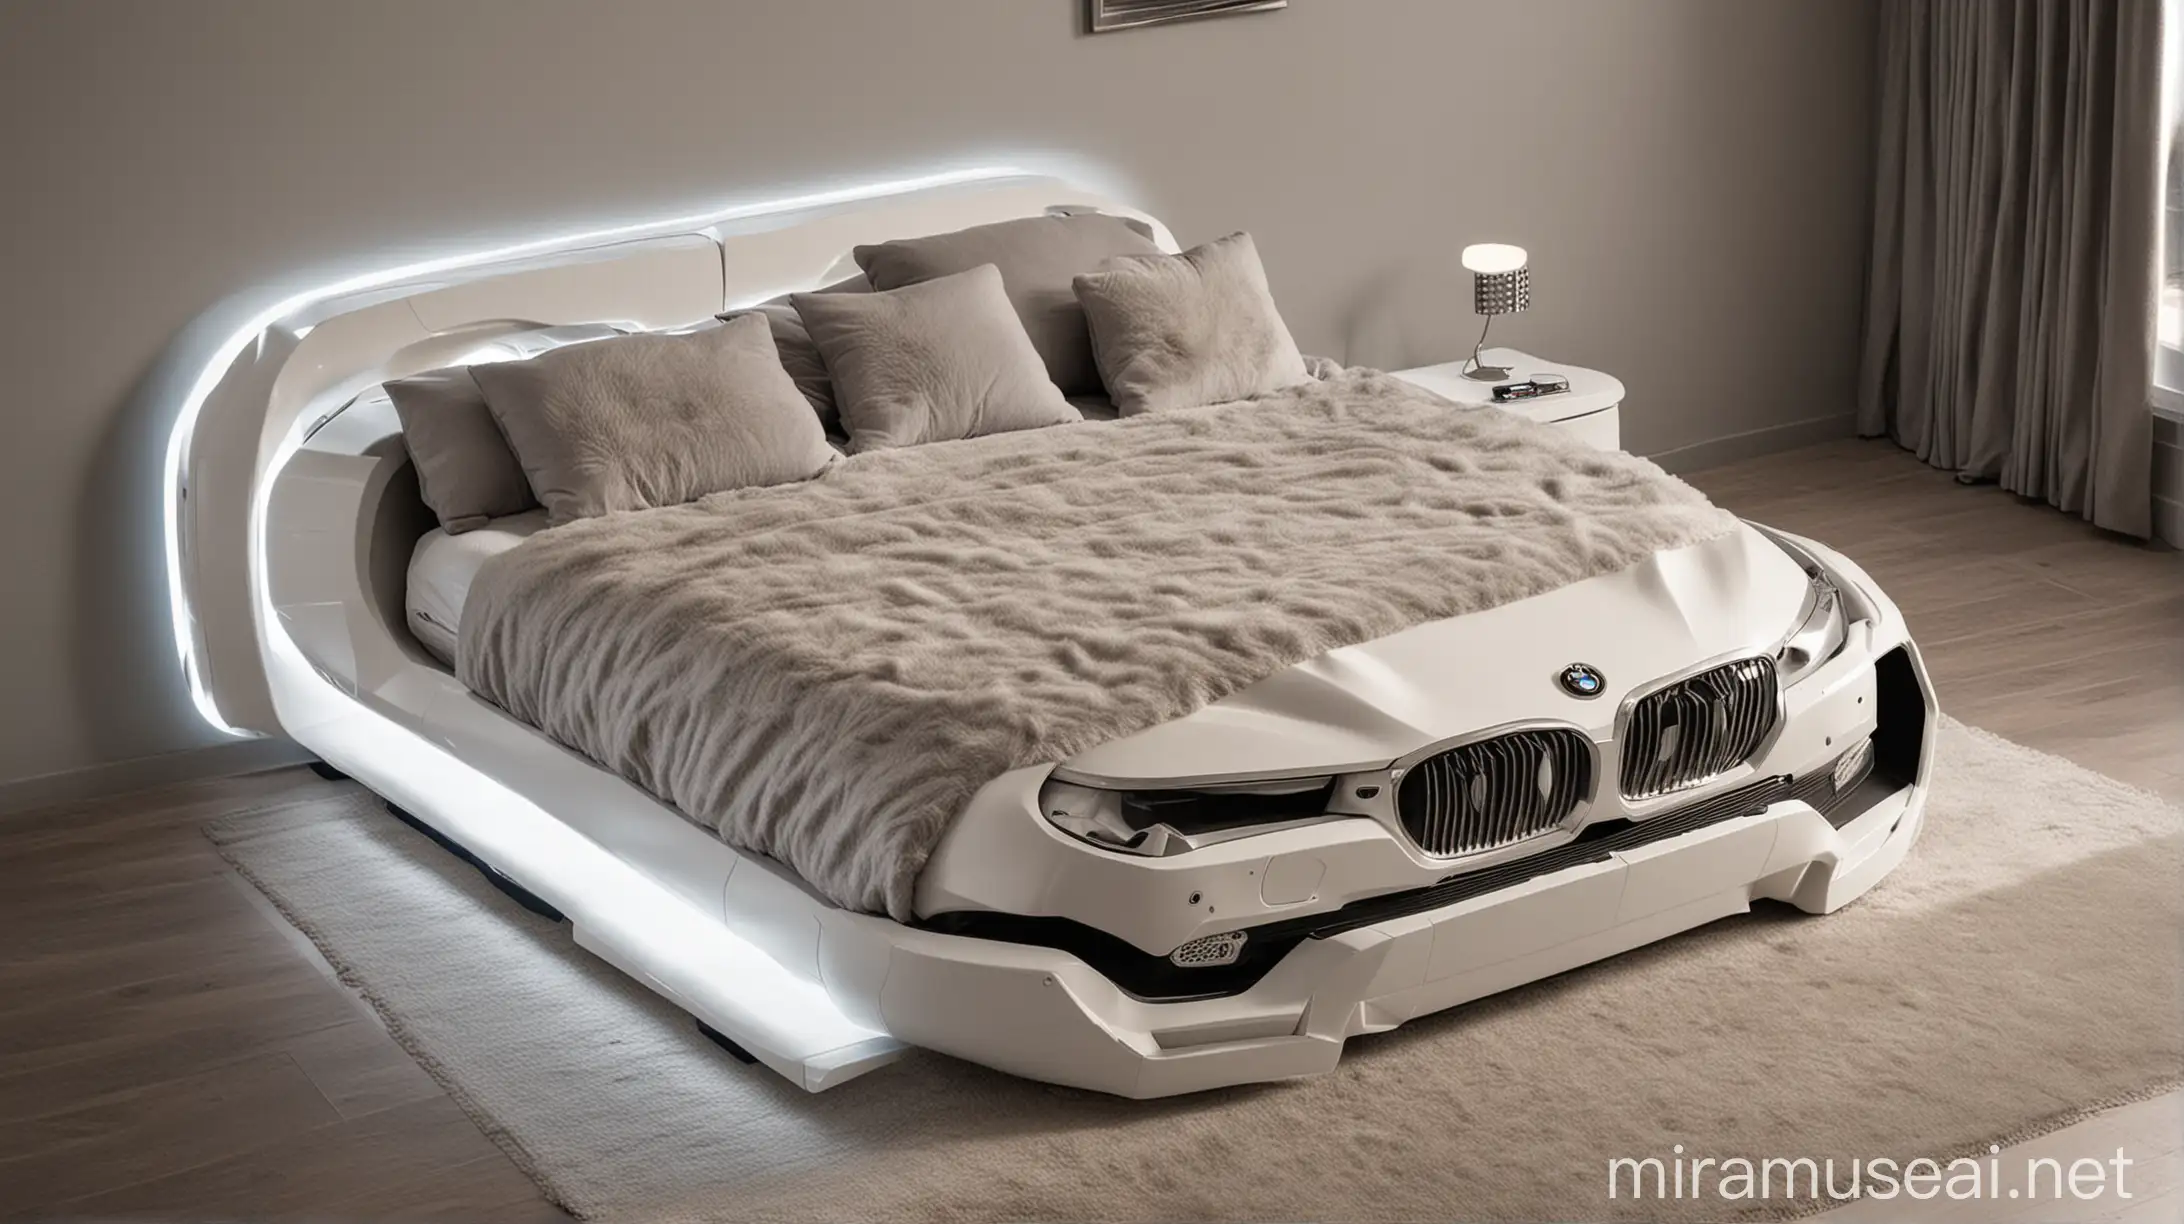 A double bed in the shape of a BMW x6 car.